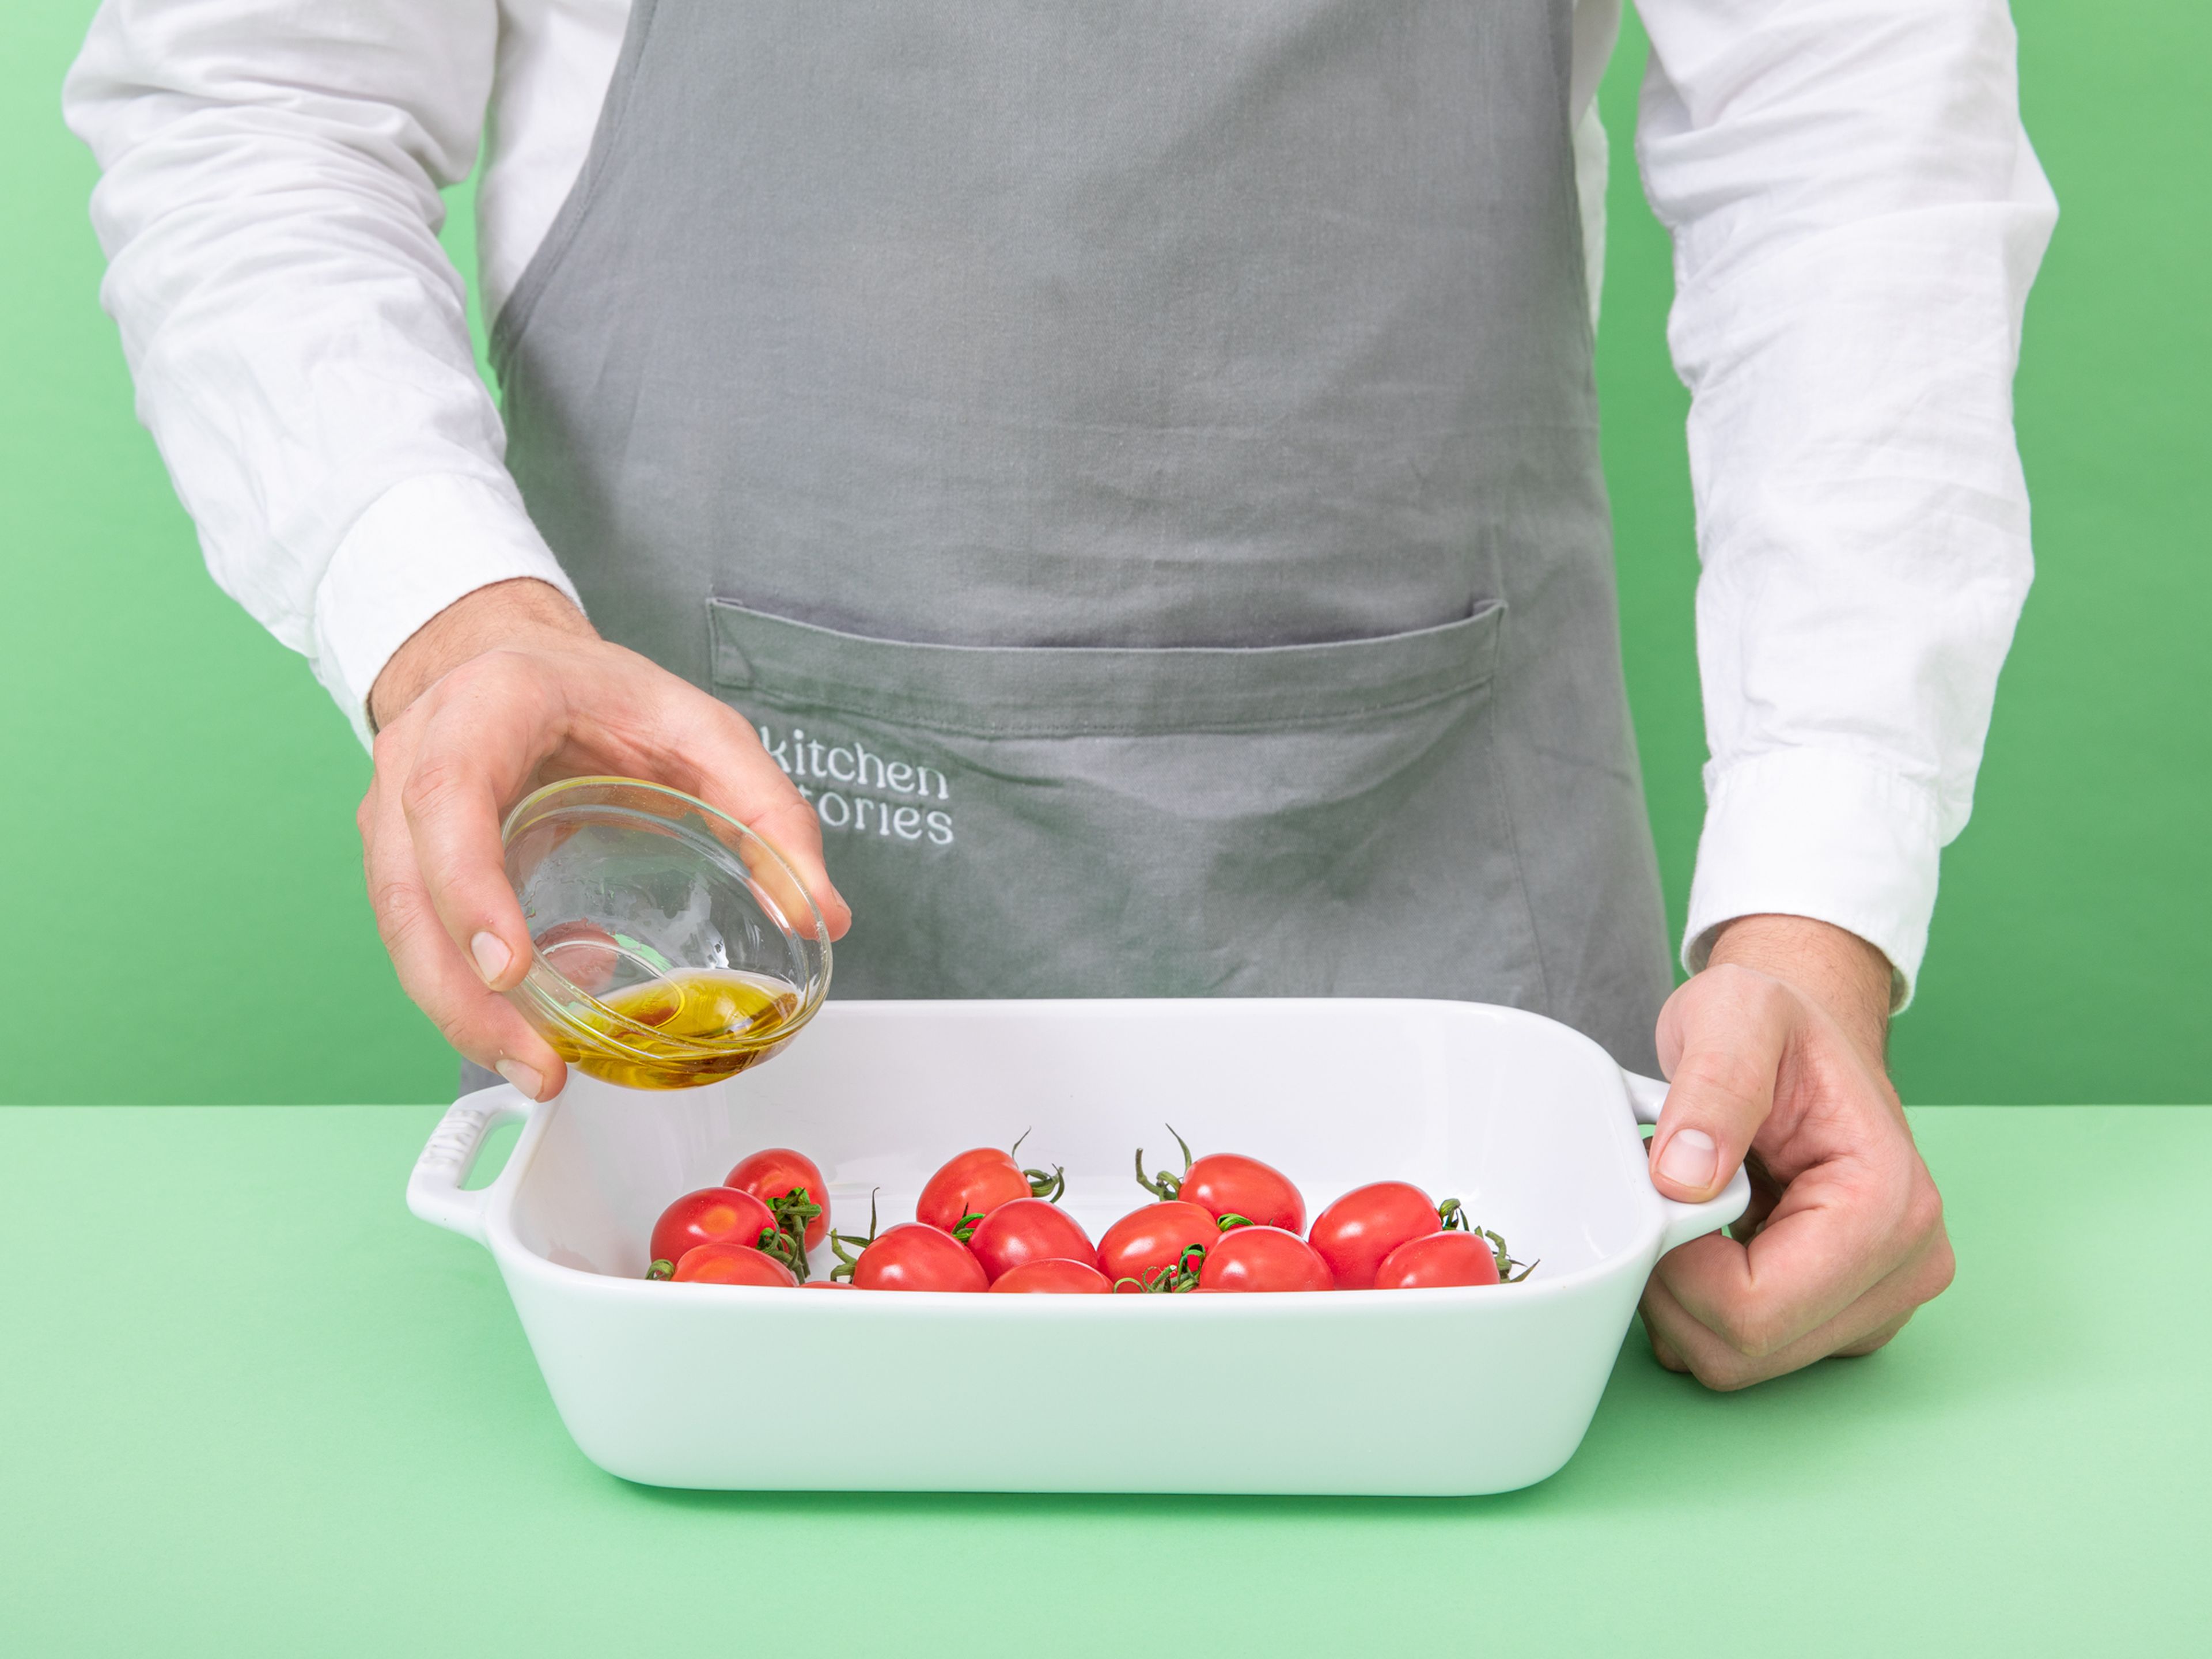 To prepare the roasted tomatoes, combine cherry tomatoes with olive oil, salt, and pepper in a baking dish. Transfer to the oven and roast at 200°C / 400°F for approx. 12 min. Add pine nuts to a small, dry pan and toast over medium-low heat, then set aside.